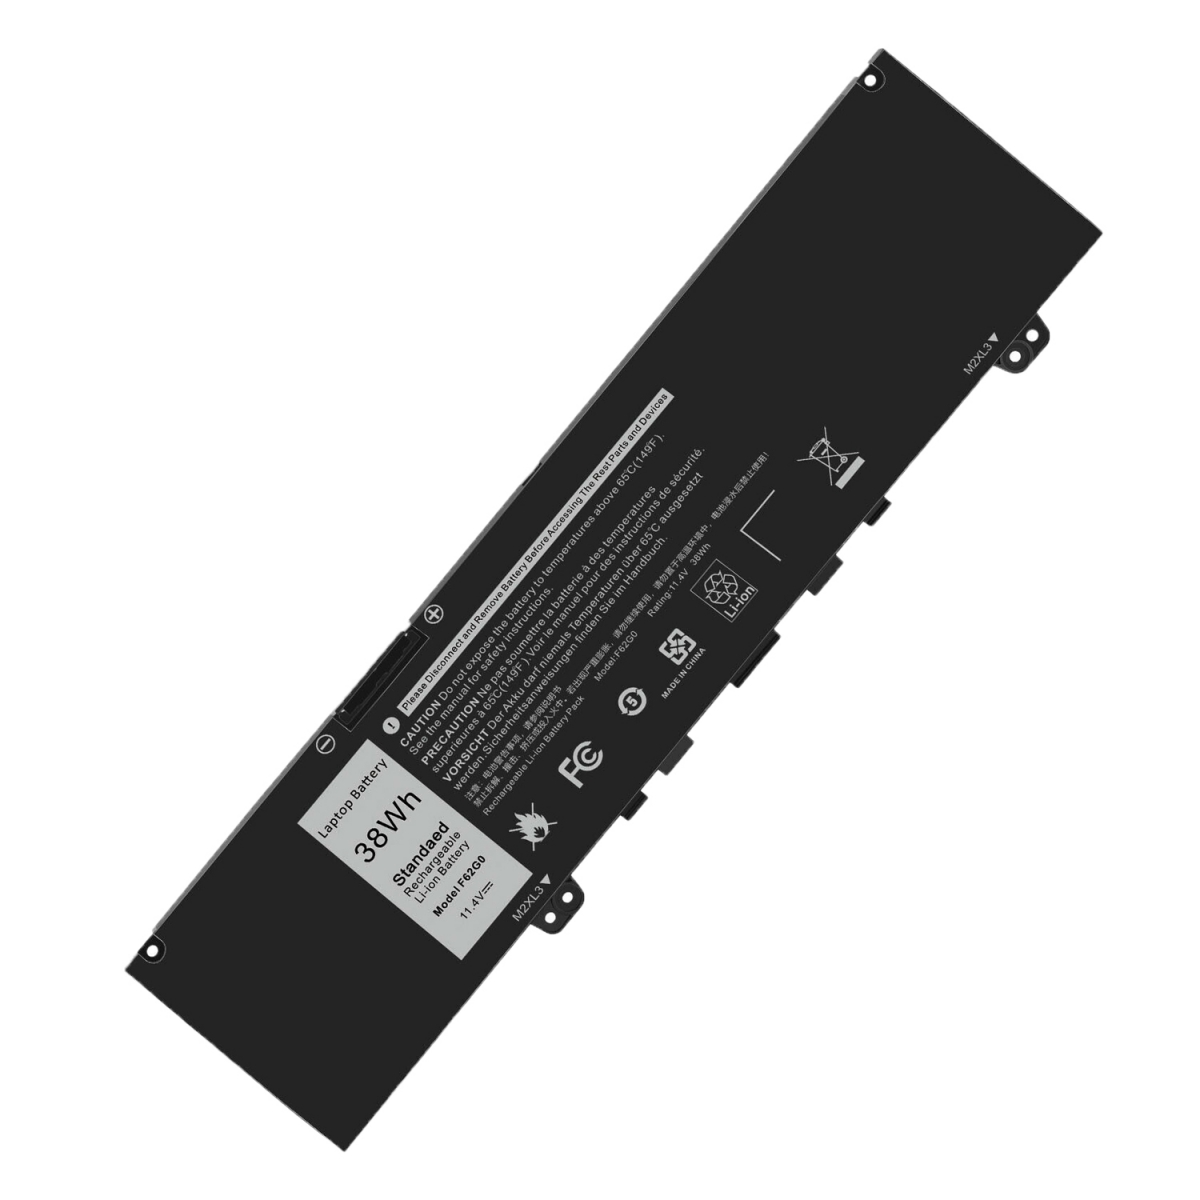 F62G0 Battery-CPY,Laptop battery, Laptop adapter, Laptop charger, Dell battery, Apple battery, HP battery